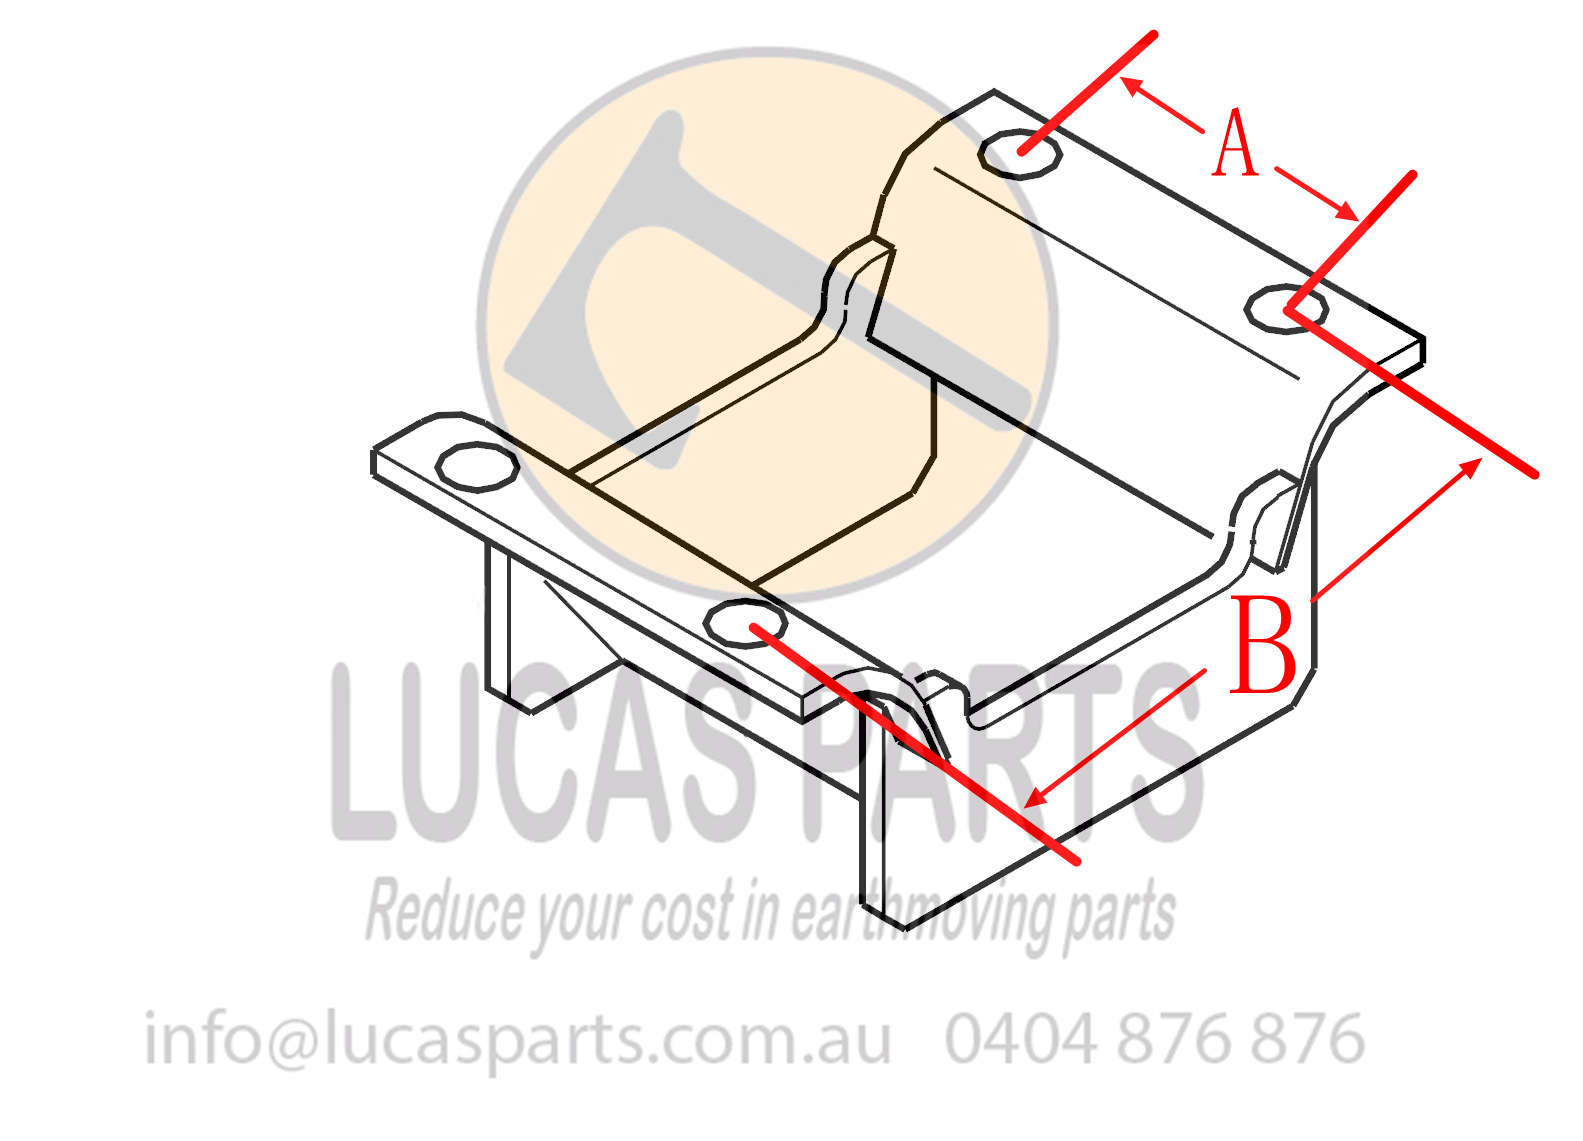 Lucas Parts Track Guide Drawing